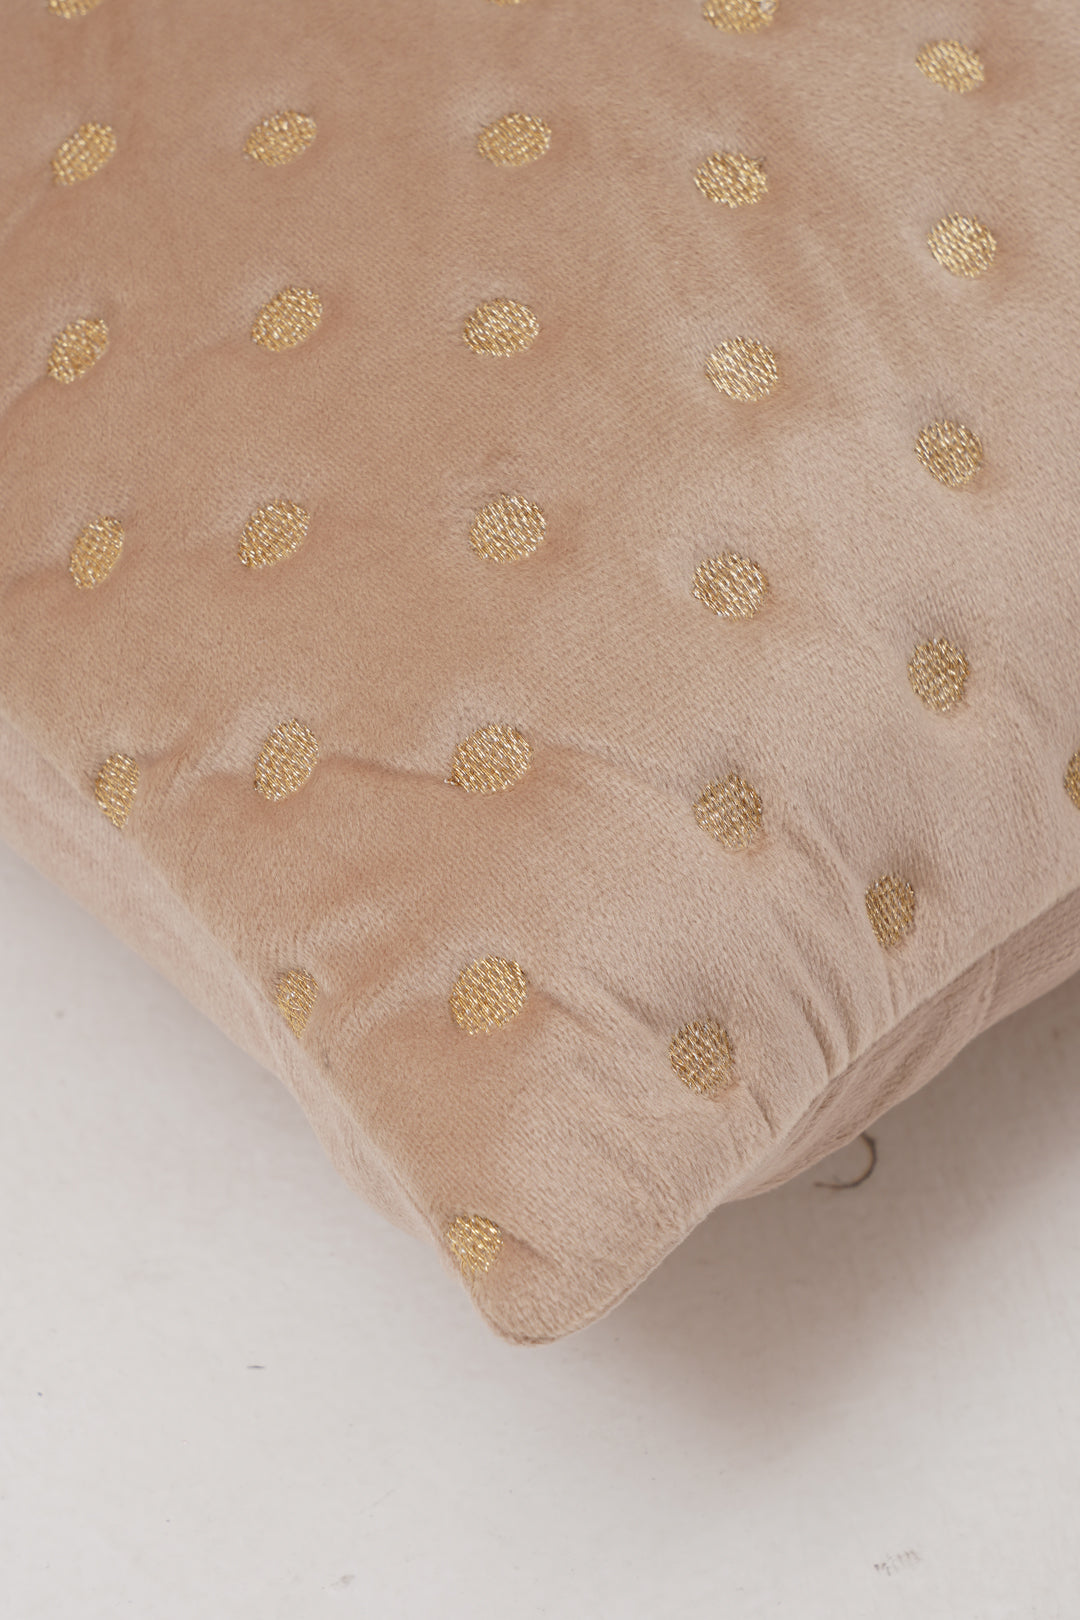 Quilted Dots Velvet Cushion Cover (Beige)